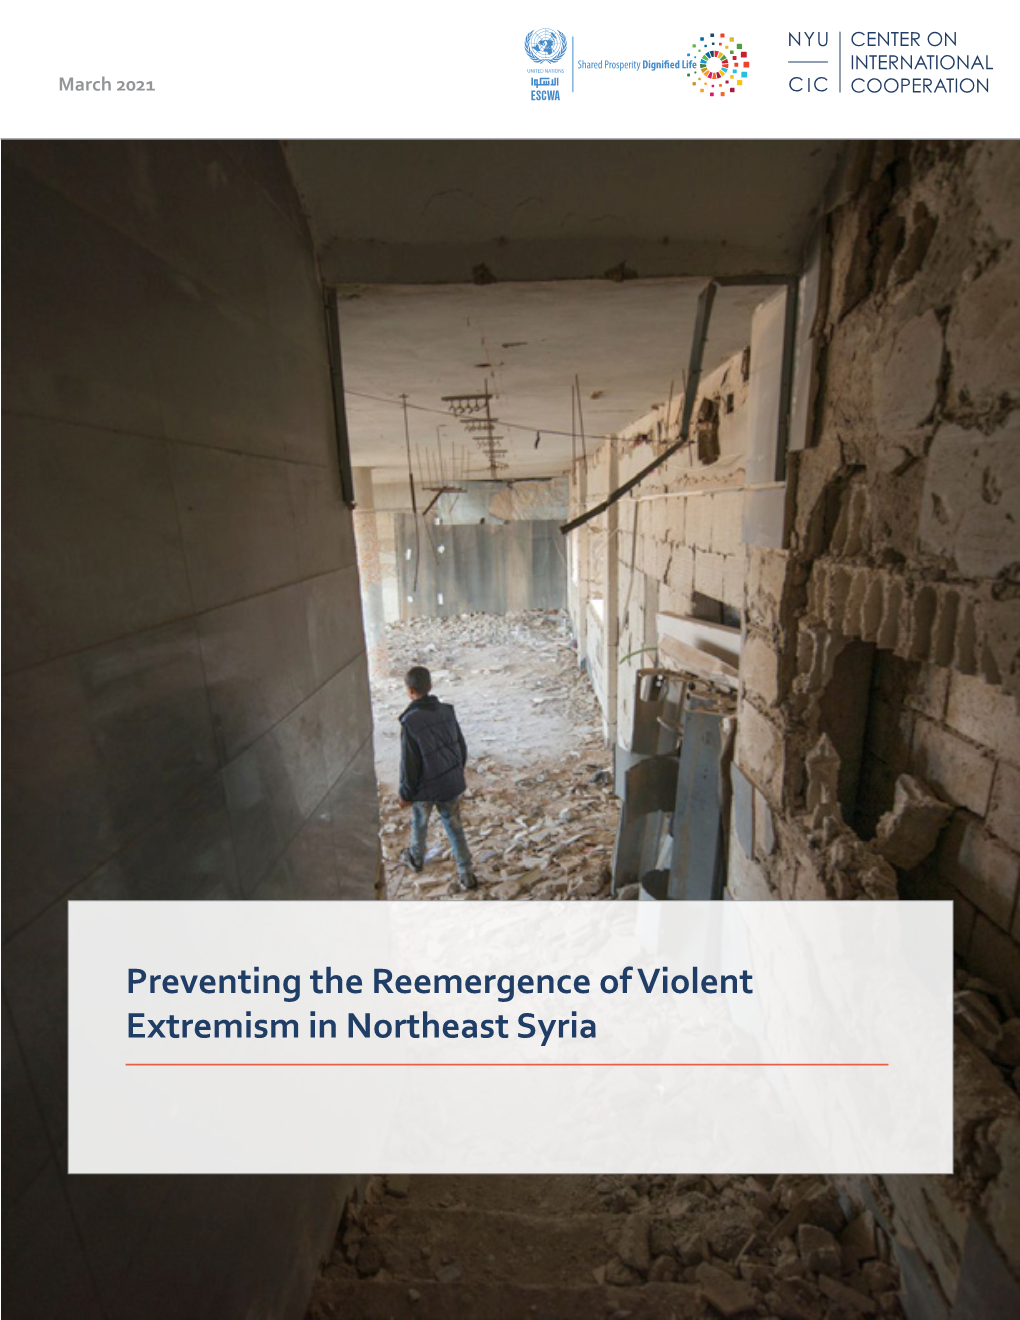 Preventing the Reemergence of Violent Extremism in Northeast Syria About the Center on International Cooperation